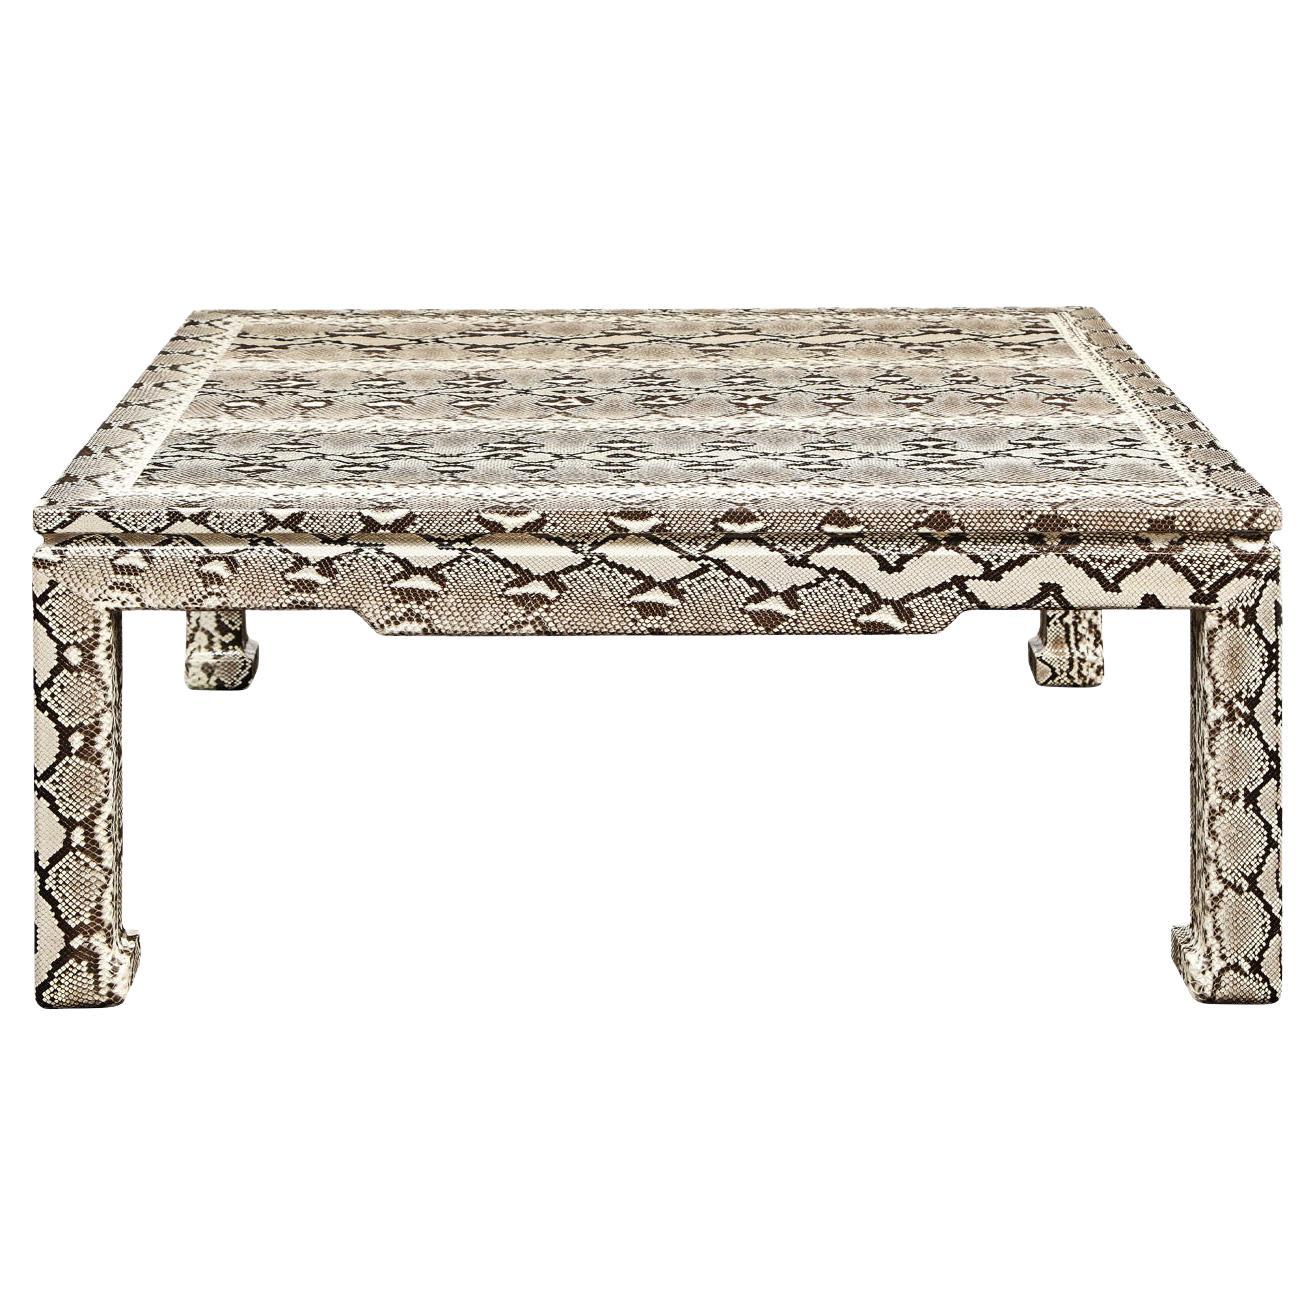 Karl Springer Exceptional "Ming Coffee Table" in Python 1980s For Sale